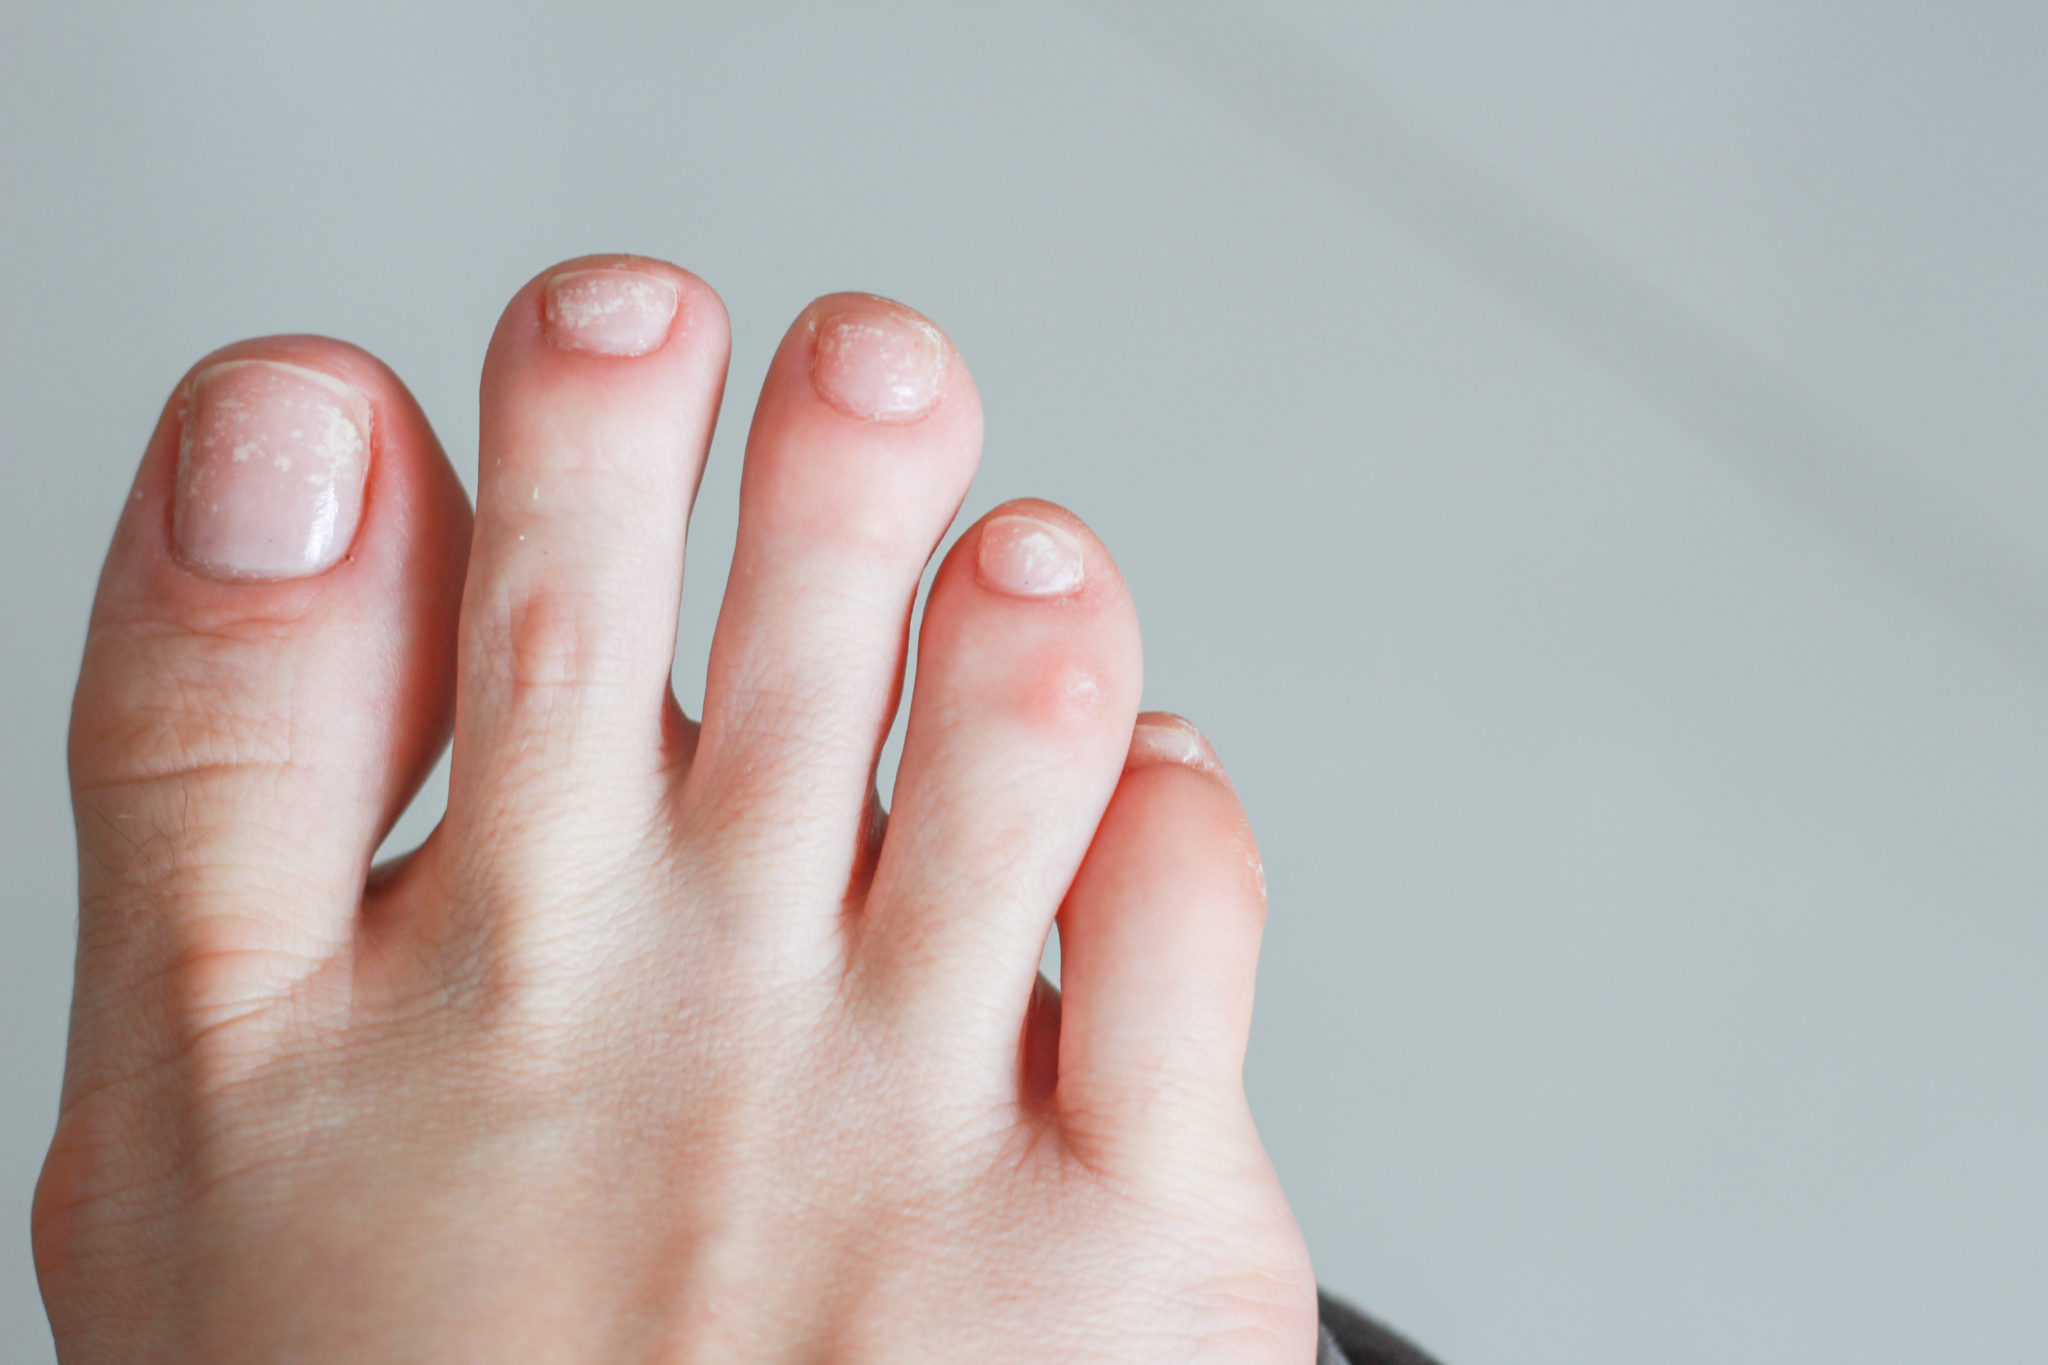 Causes Of White Spots On Your Toenails My Footdr